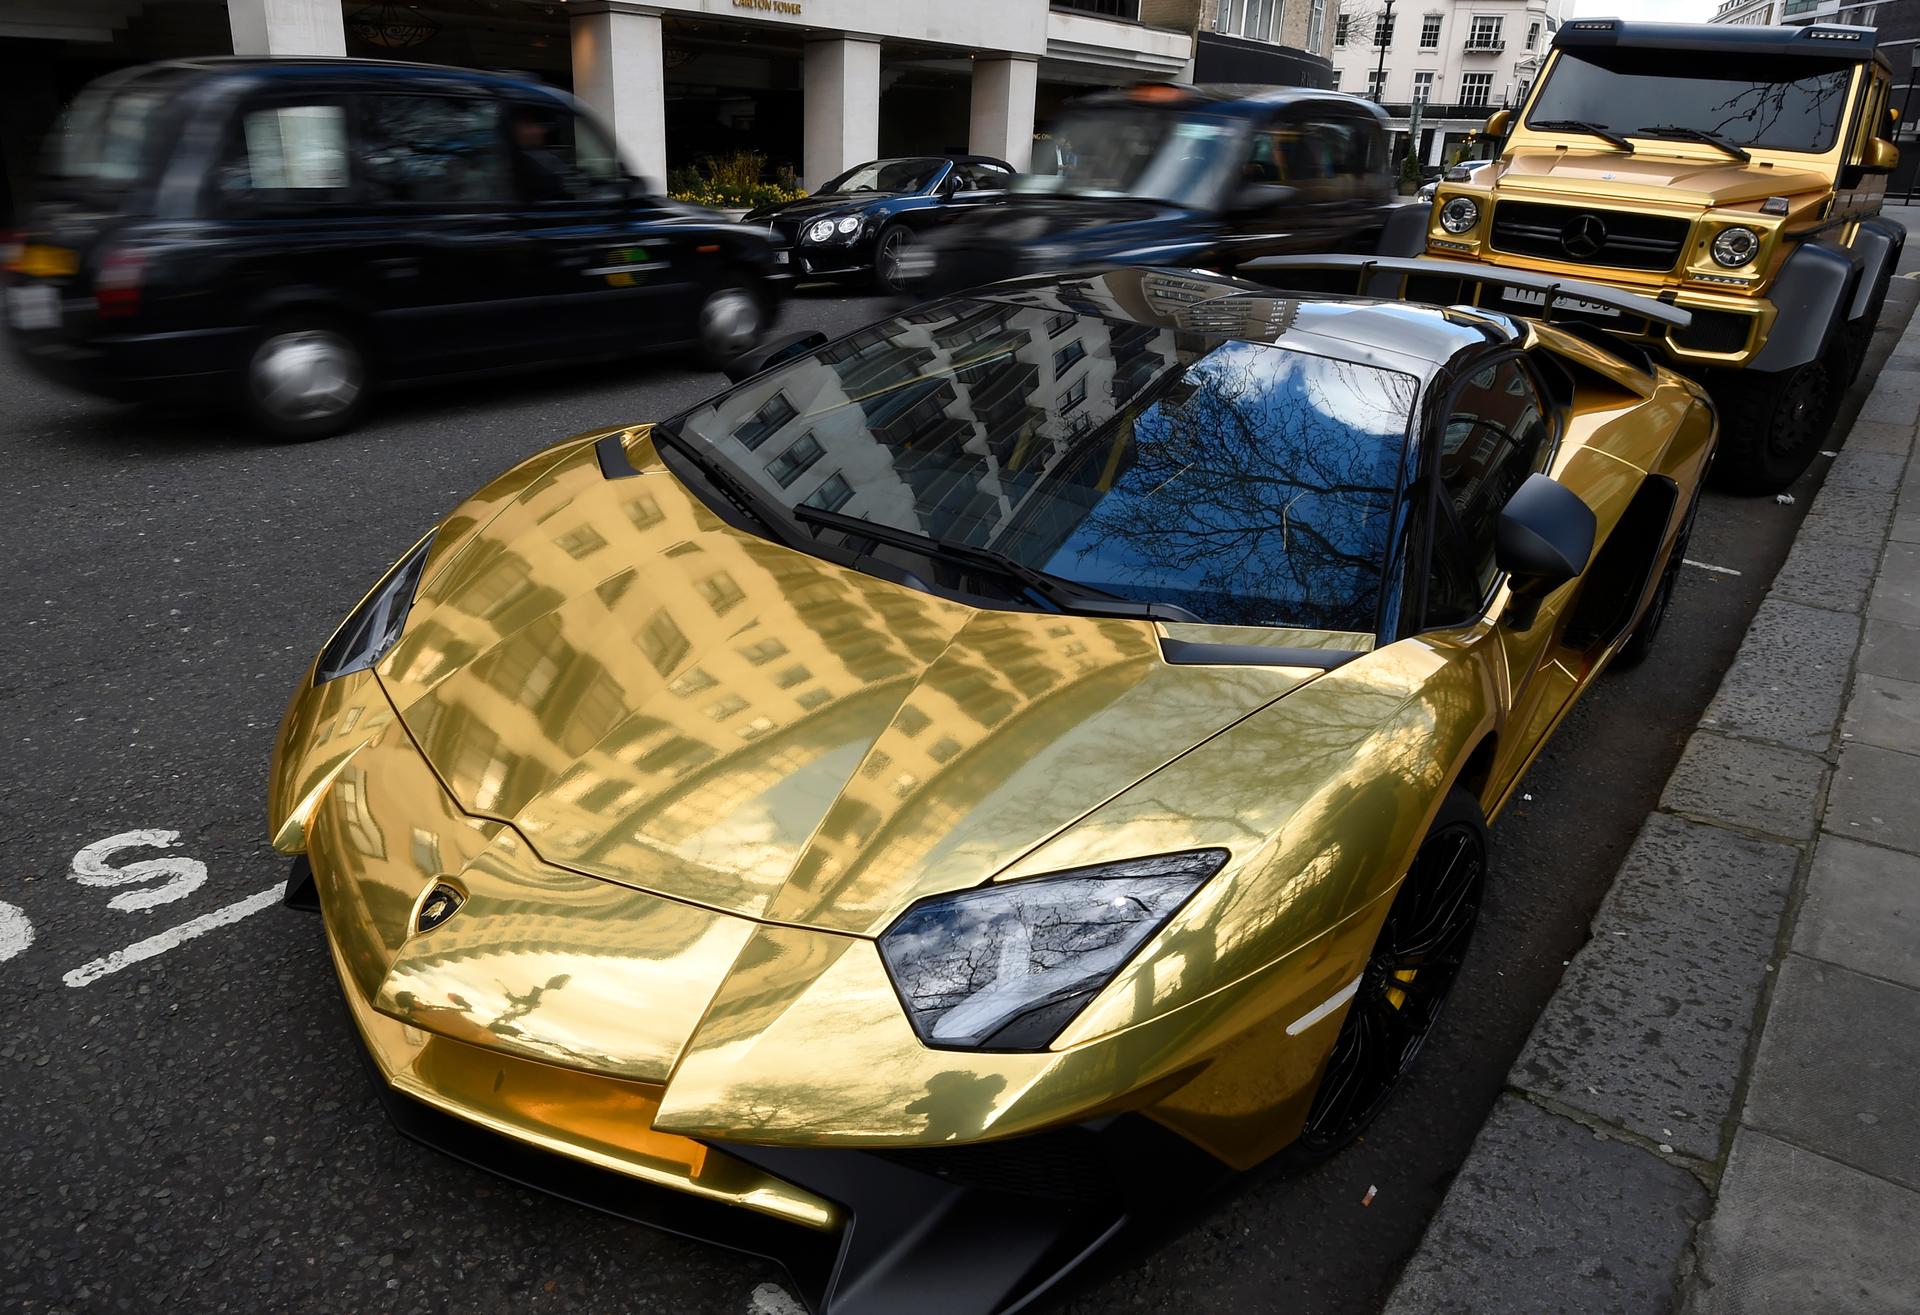 One of the fleet of golden supercars that has obsessed London's media this week.